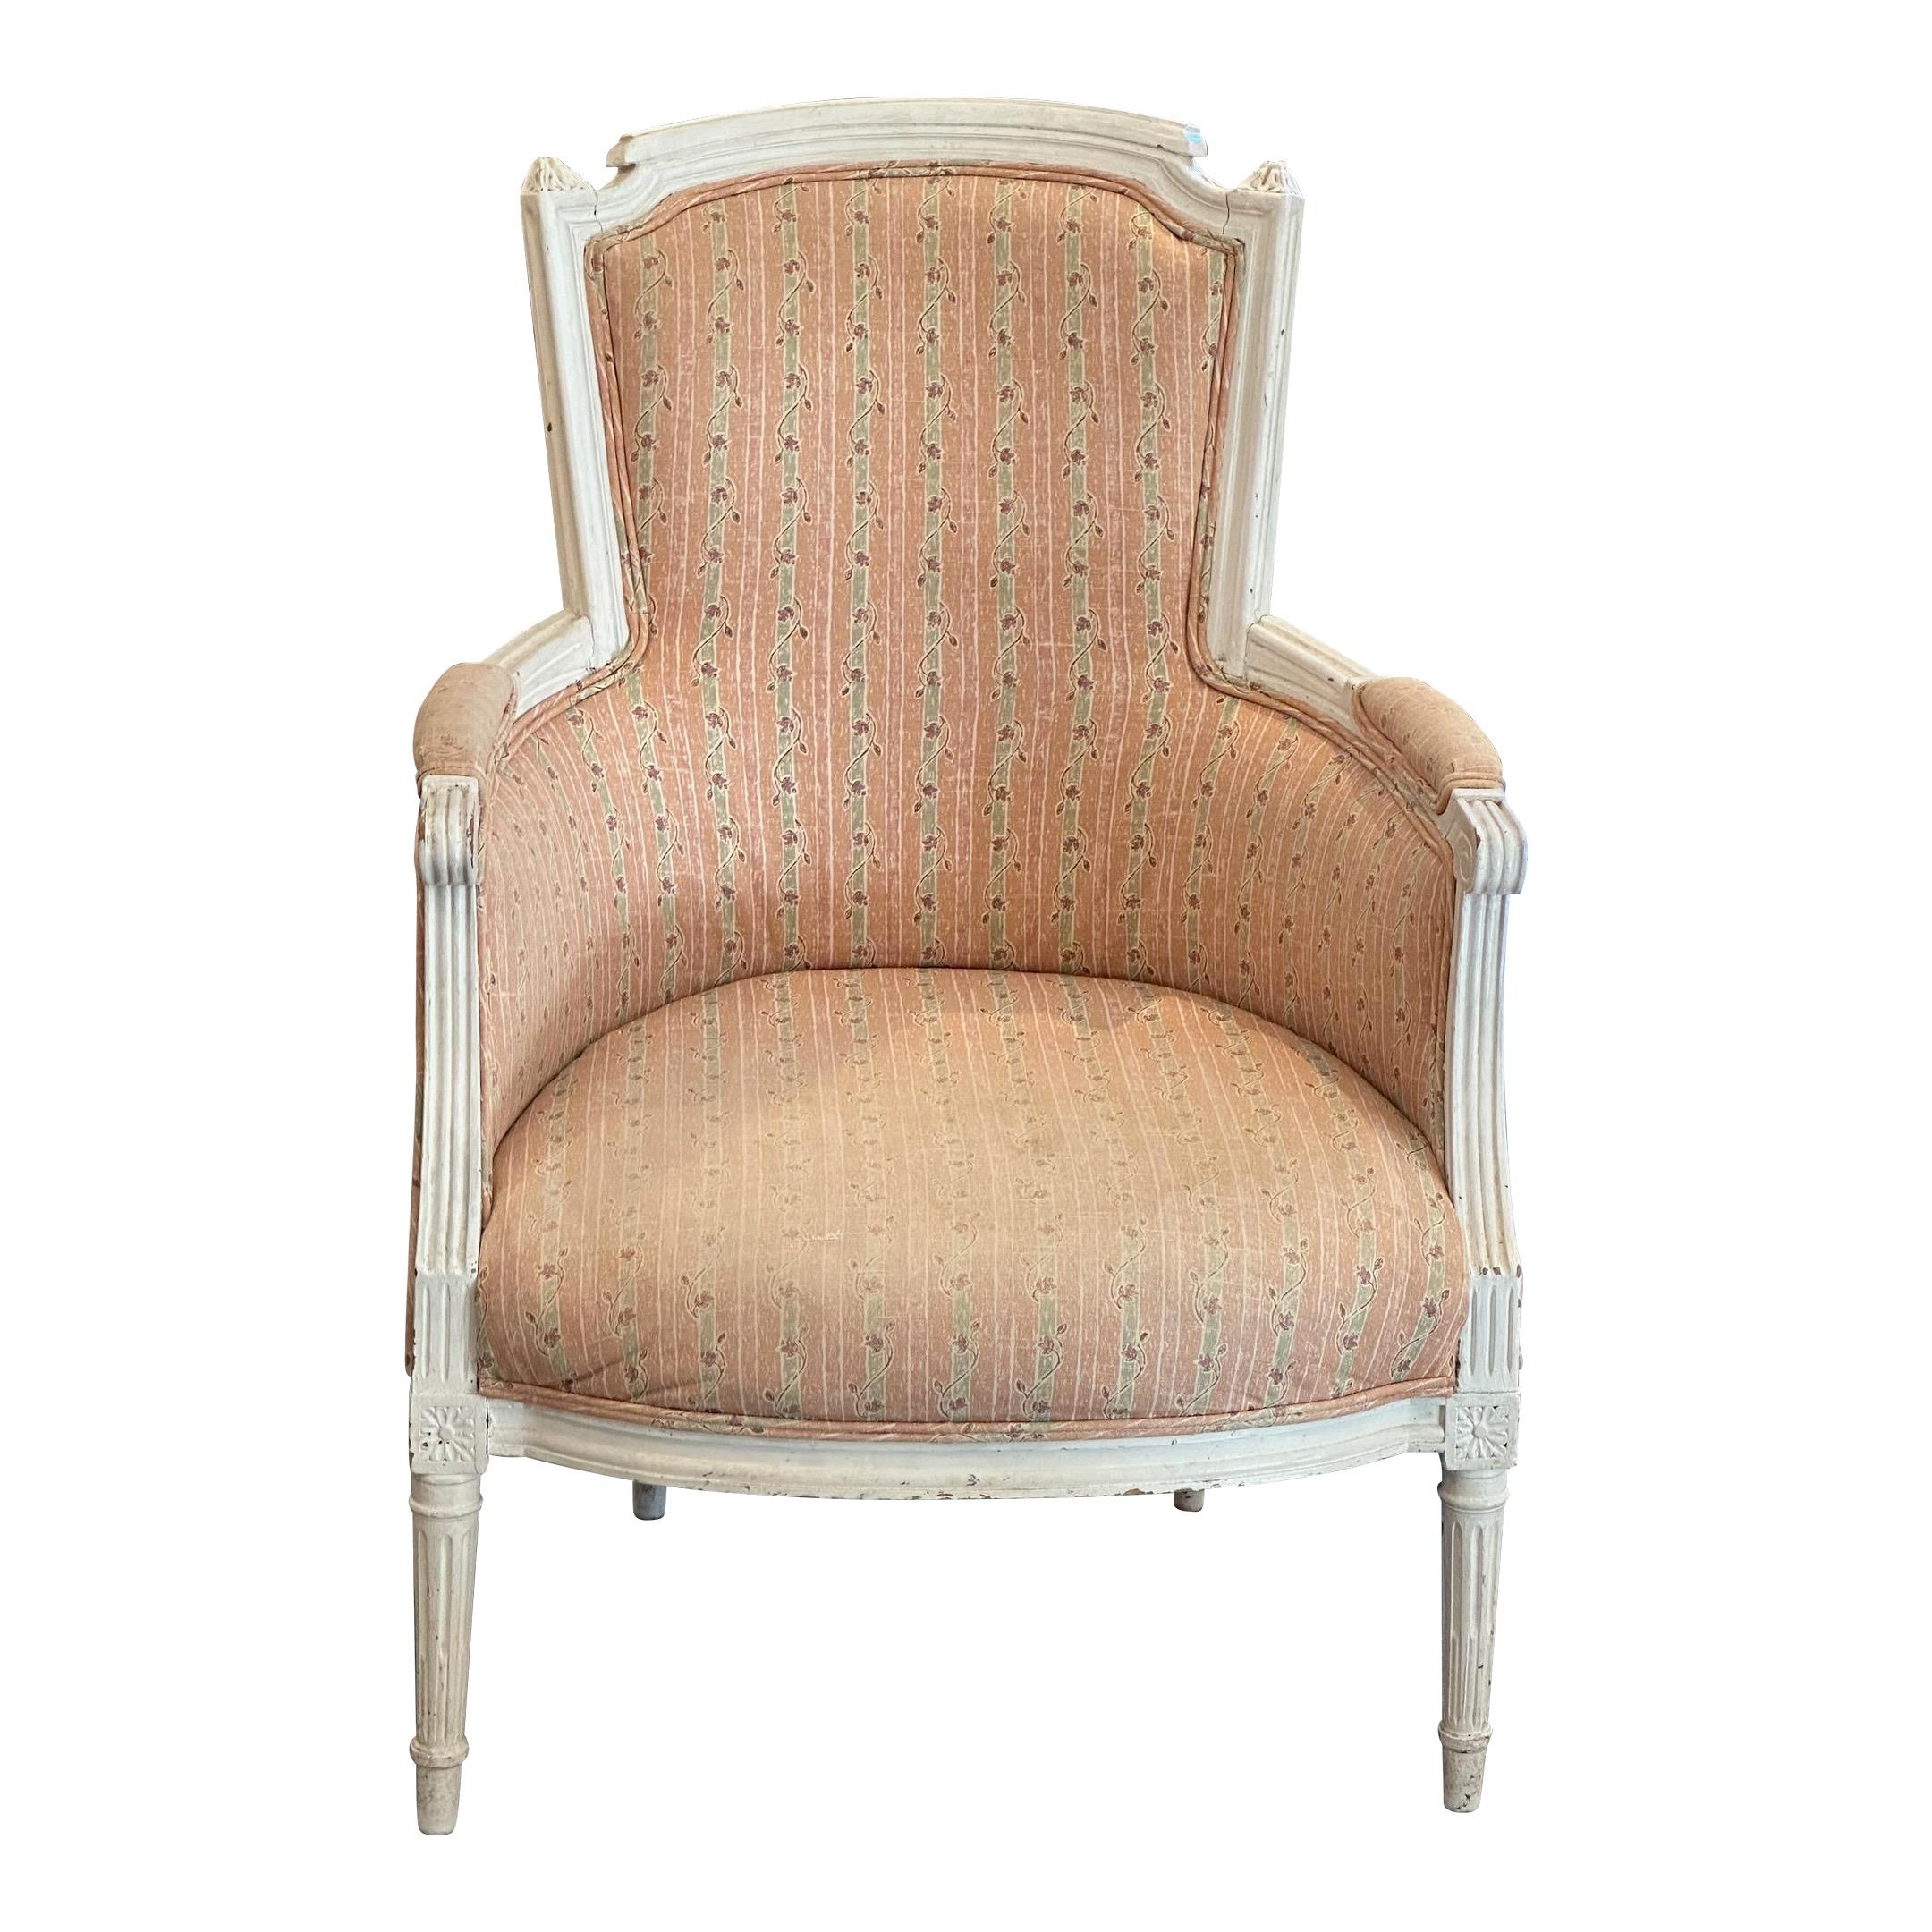 Early 20th Century French Bergere Chair